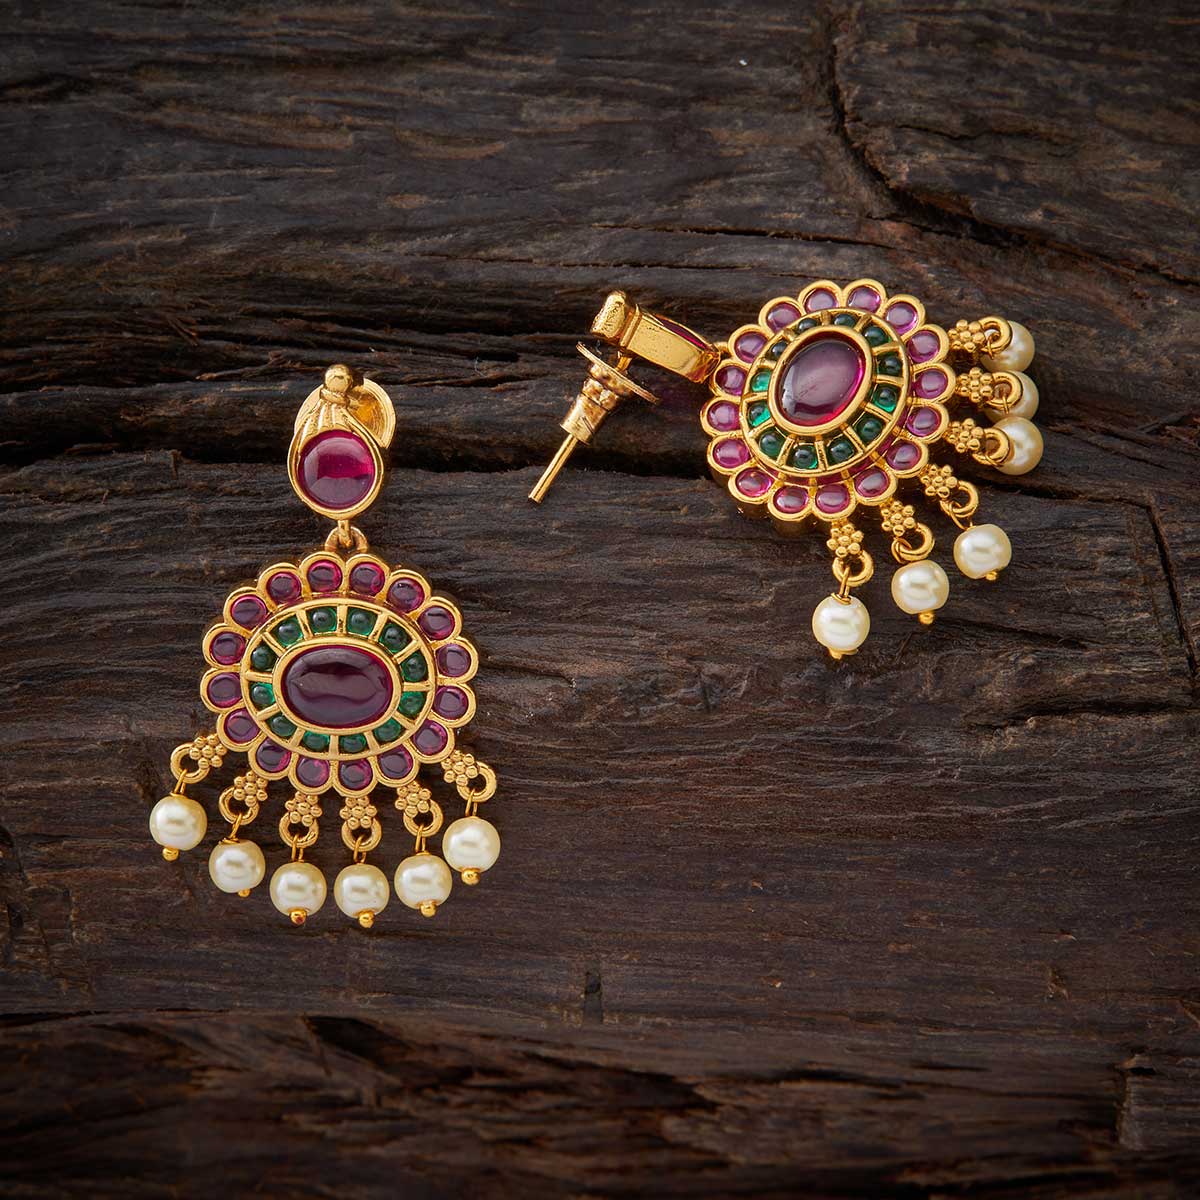 Kushal's Fashion Jewellery - Jhumka Earring with Peacock stud with Antique  Gold Polish and Ruby Green coloured stones and Pearl drops. #antique #pearl  #jewellery Design No: 81036rg Buy Online at: https://www.kushals .com/collections/antique-earrings |